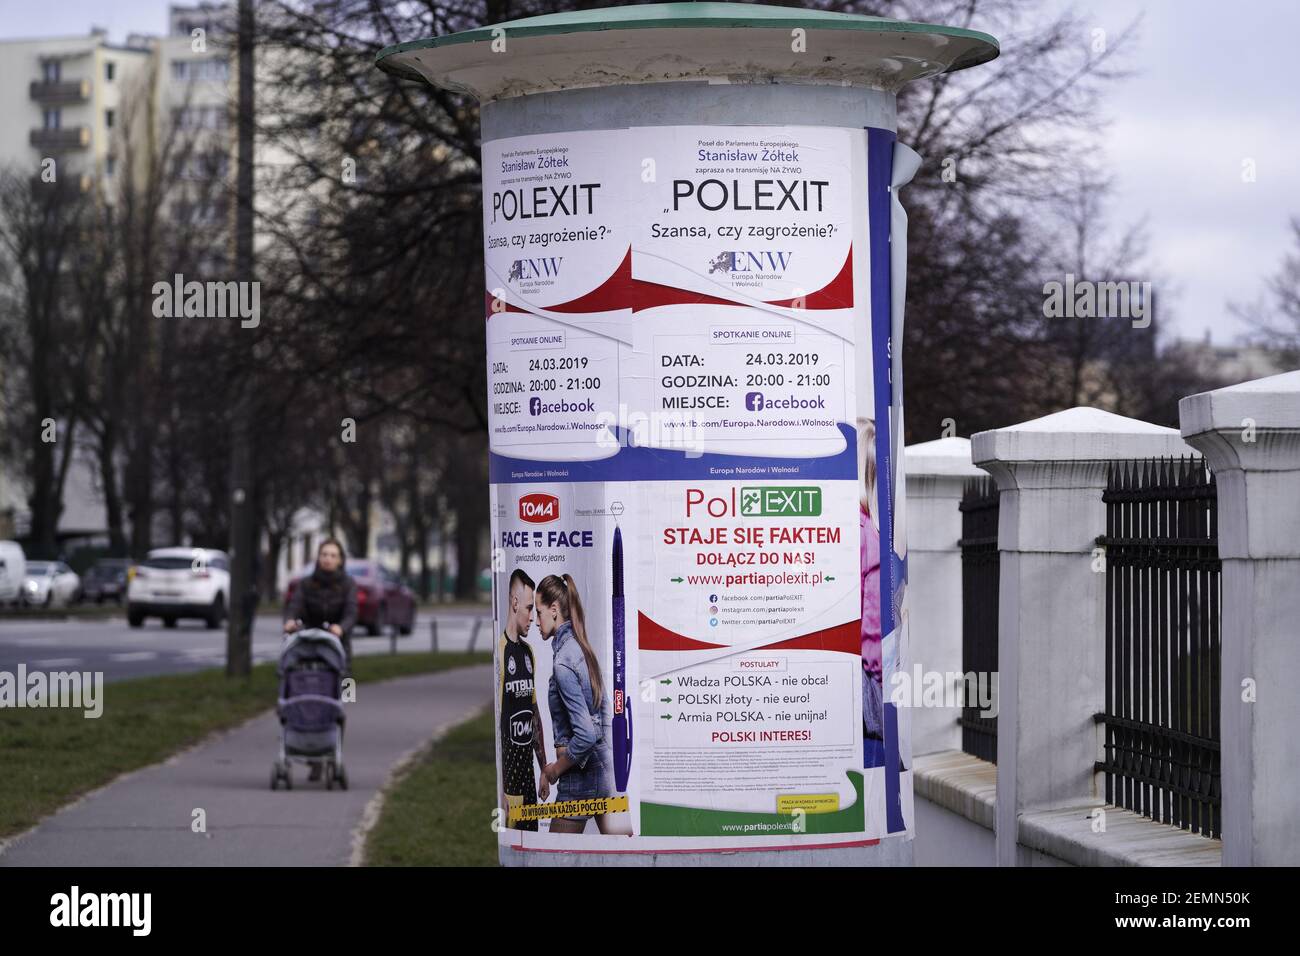 Posters adverstising the newly formed Eurosceptic Polexit party are seen in Warsaw, Poland on March 19, 2019. The Polexit party was formed by former members of the Congress of the New Right and Satnislaw Zoltek, a right-wing politician and EP member as part of the Europe of Nations and Freedom, the smallest group in the European Parliament. (Photo by Jaap Arriens / Sipa USA) Stock Photo